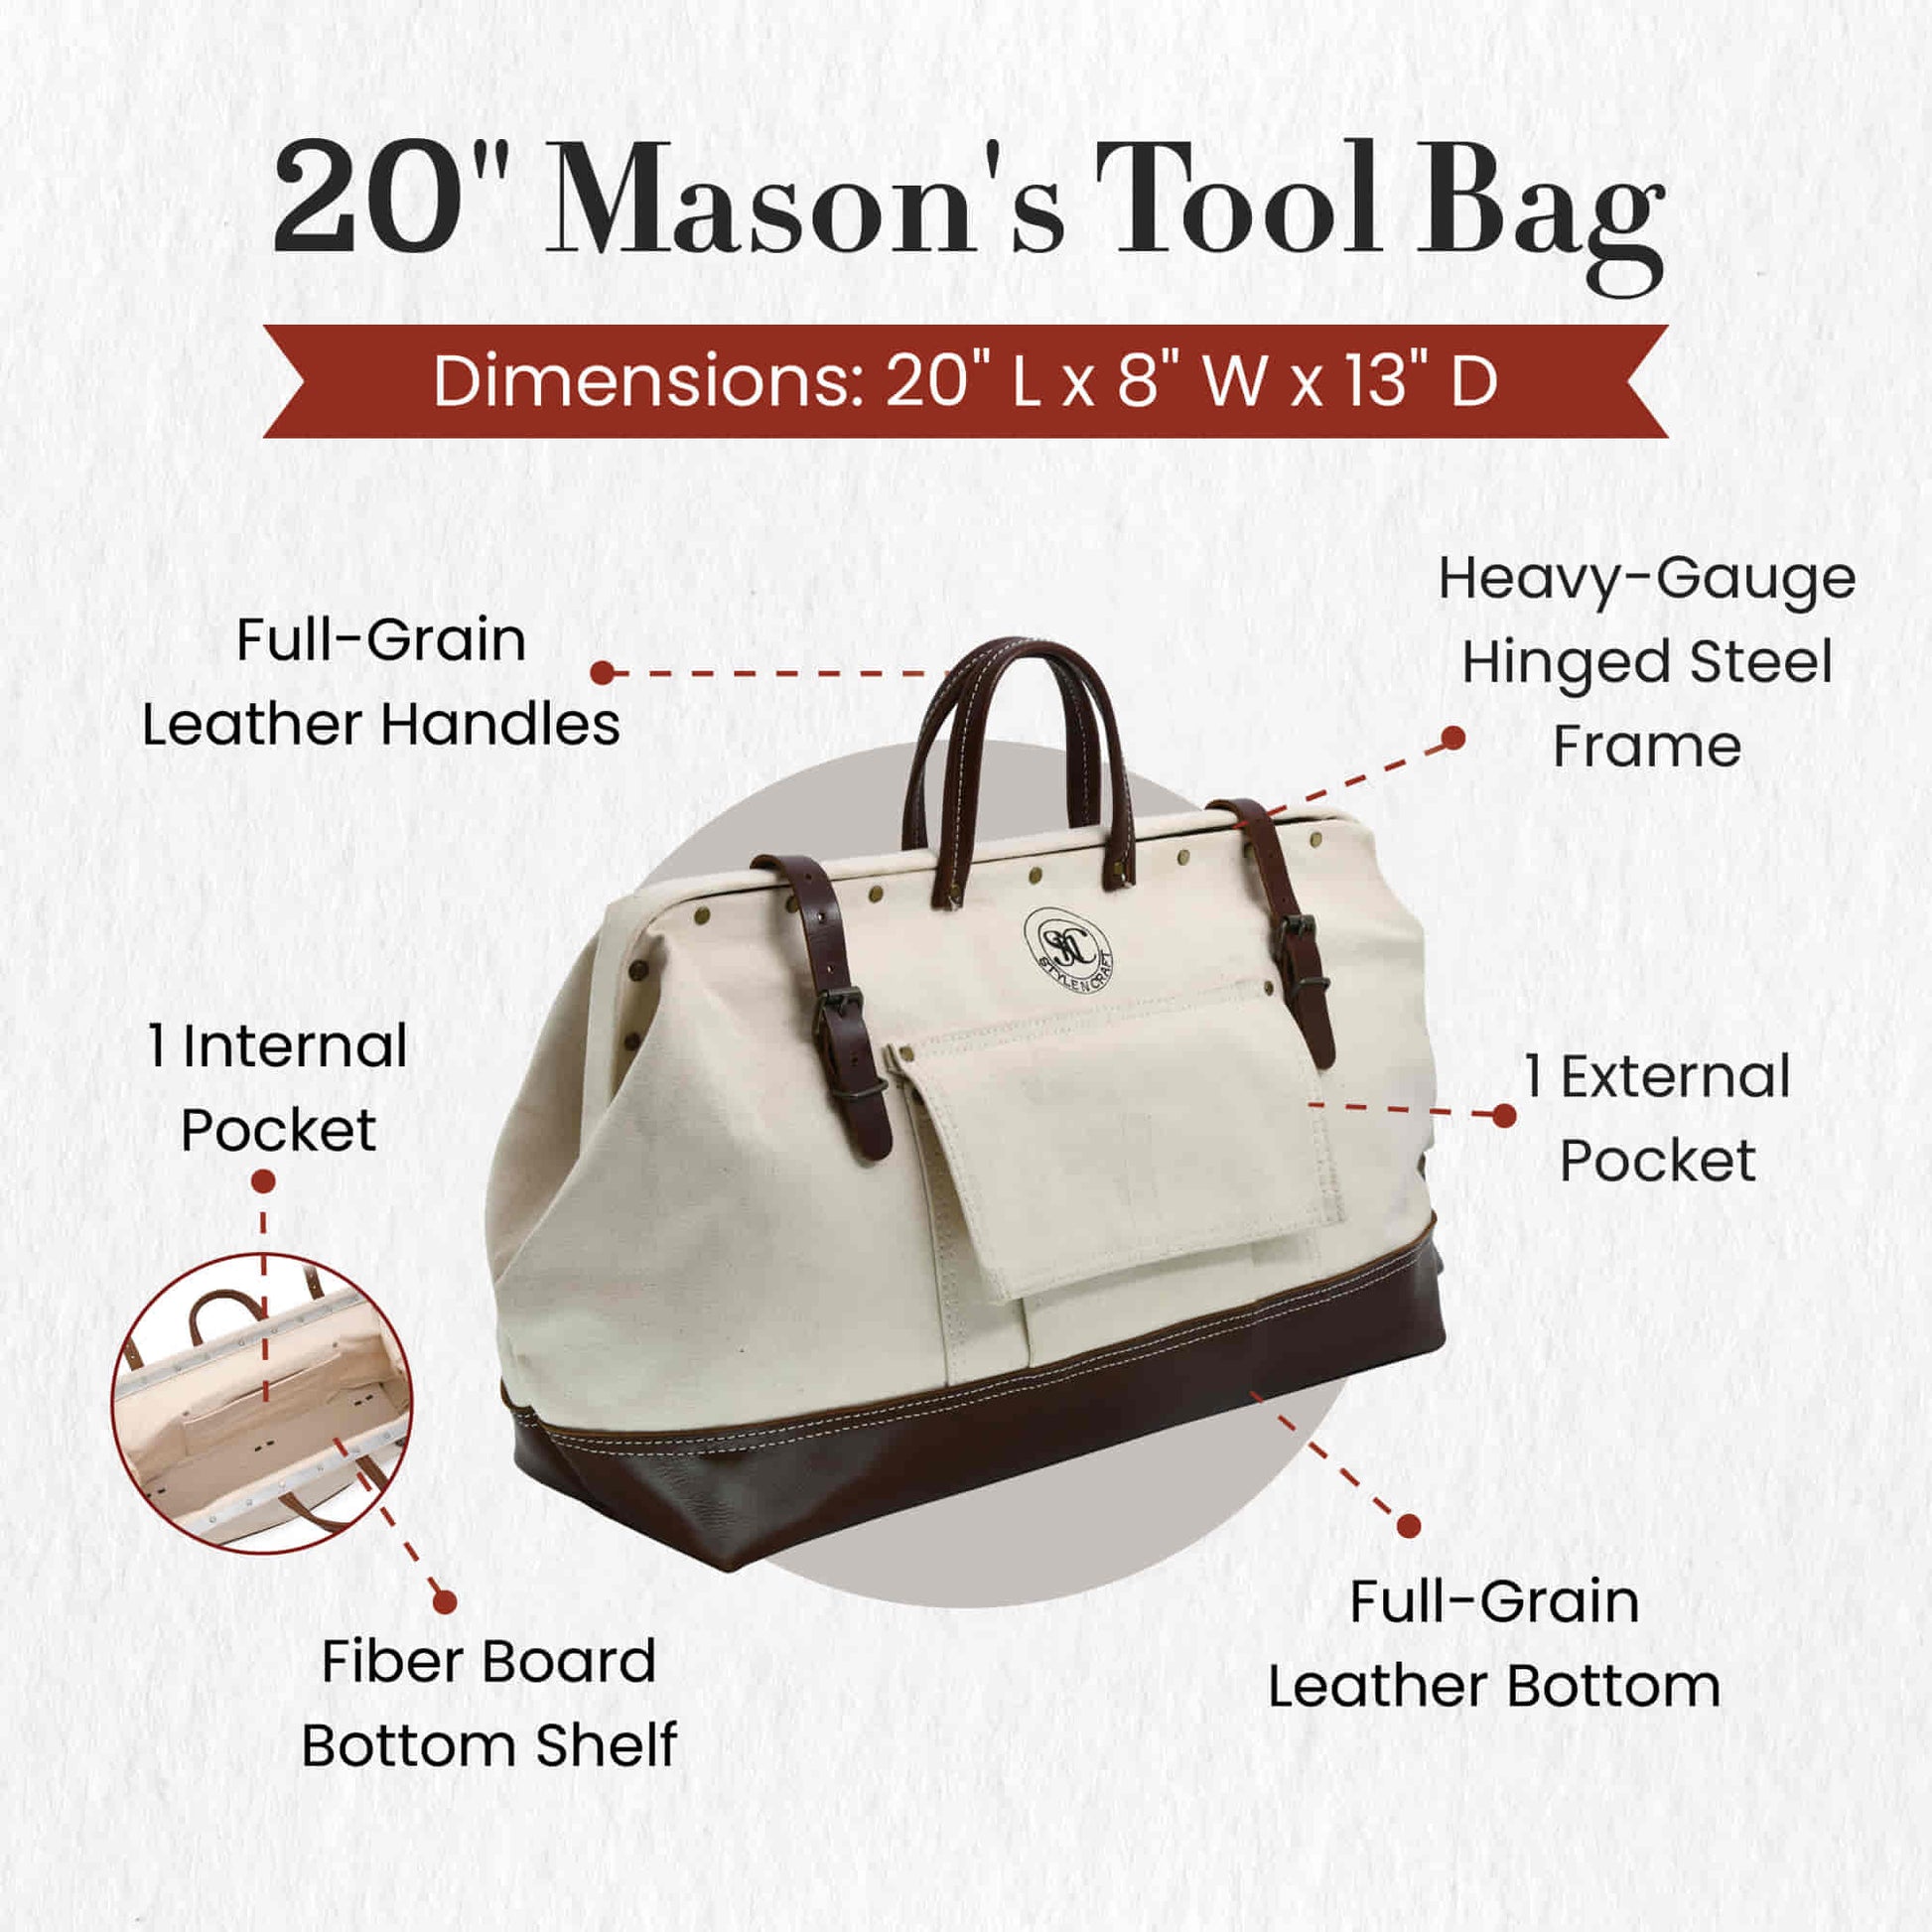 Style n Craft 97517 - 20 Inch Mason's Tool Bag in White Canvas and Dark Tan Full Grain Leather Combination - Front View Showing the details